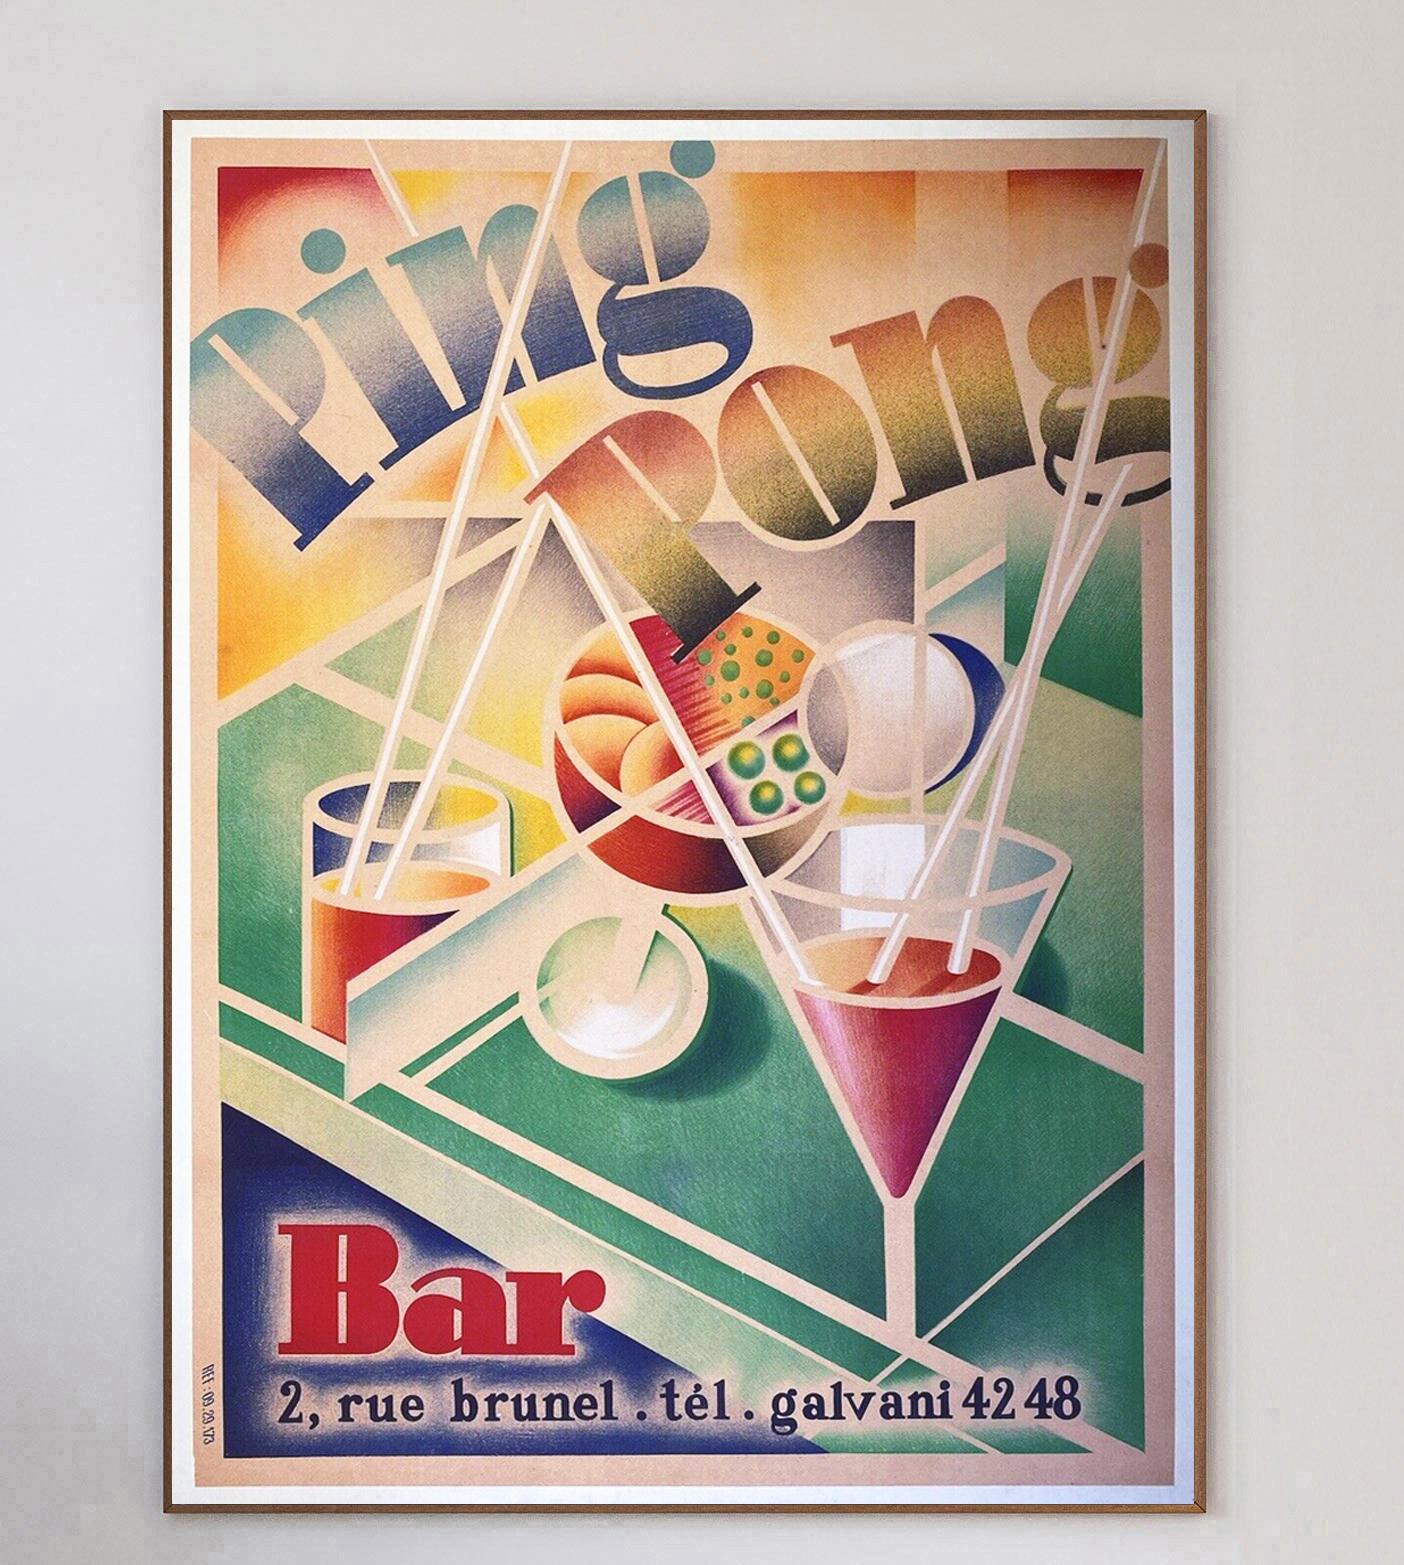 Colourful and vibrant poster for Ping Pong Bar on Rue Brunel in Paris, France. This Art Deco design was created in 1958 to advertise the bar and the brilliant design draws you in with colourful cocktails in various glasses.

This rare piece is in